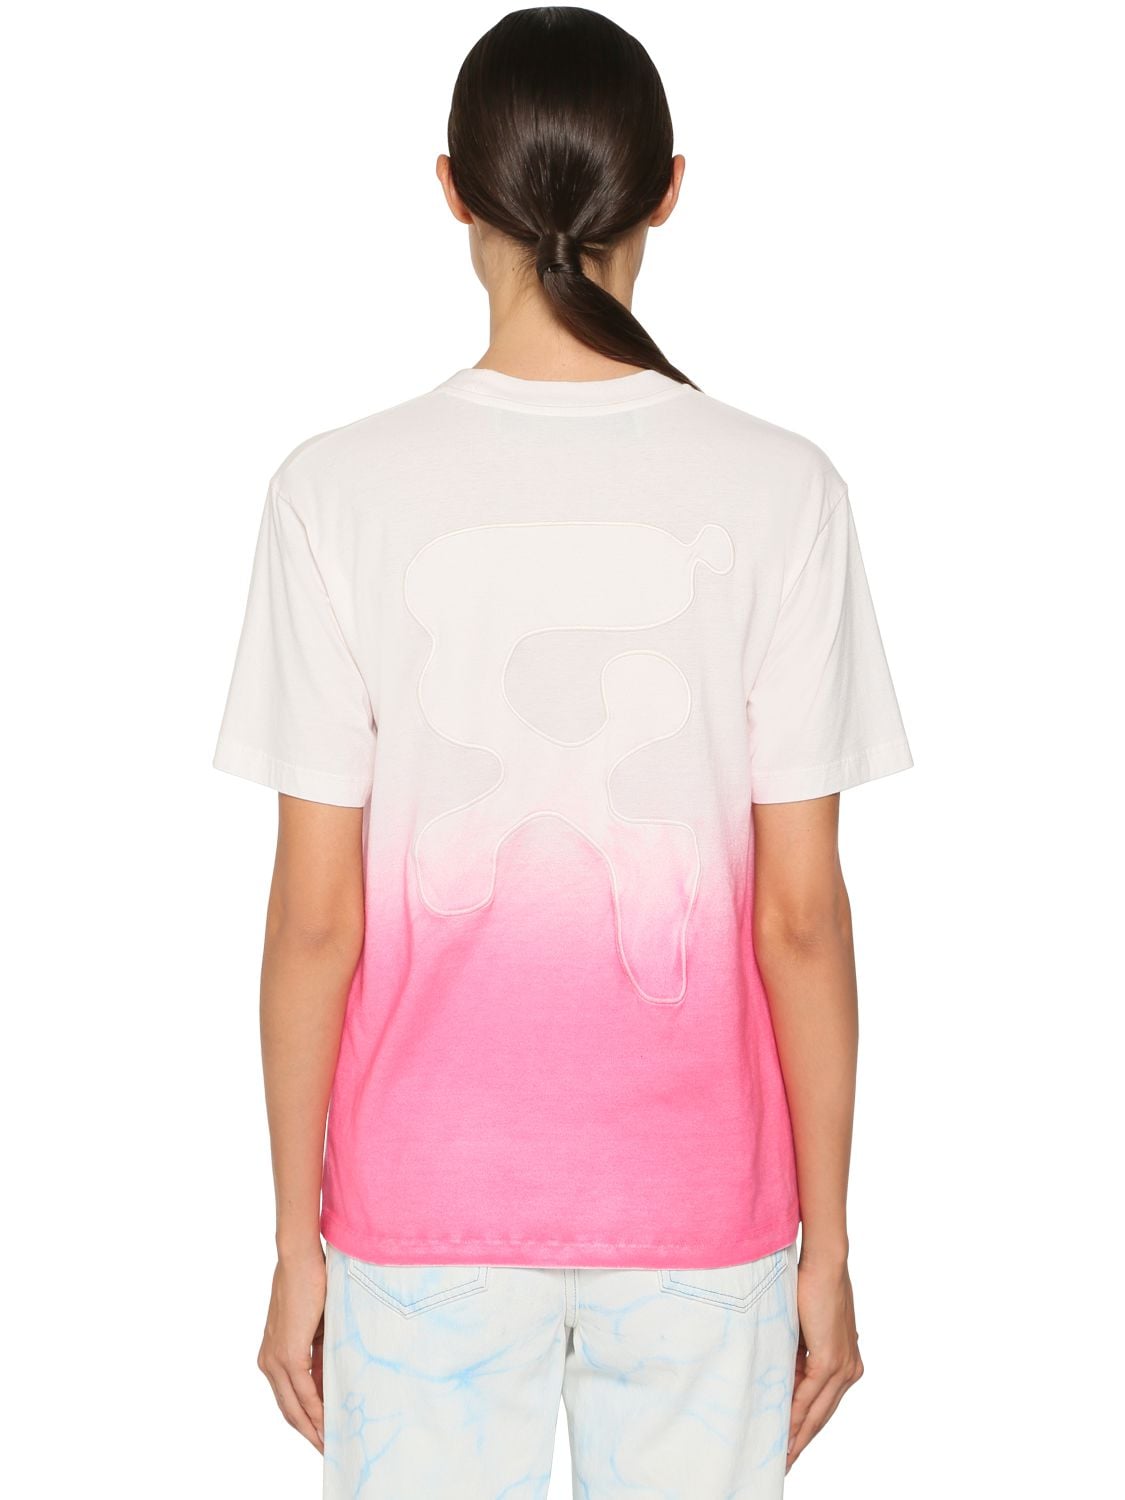 OFF-WHITE GRADIENT PRINTED COTTON JERSEY T-SHIRT,71I3KW005-MDEYOA2